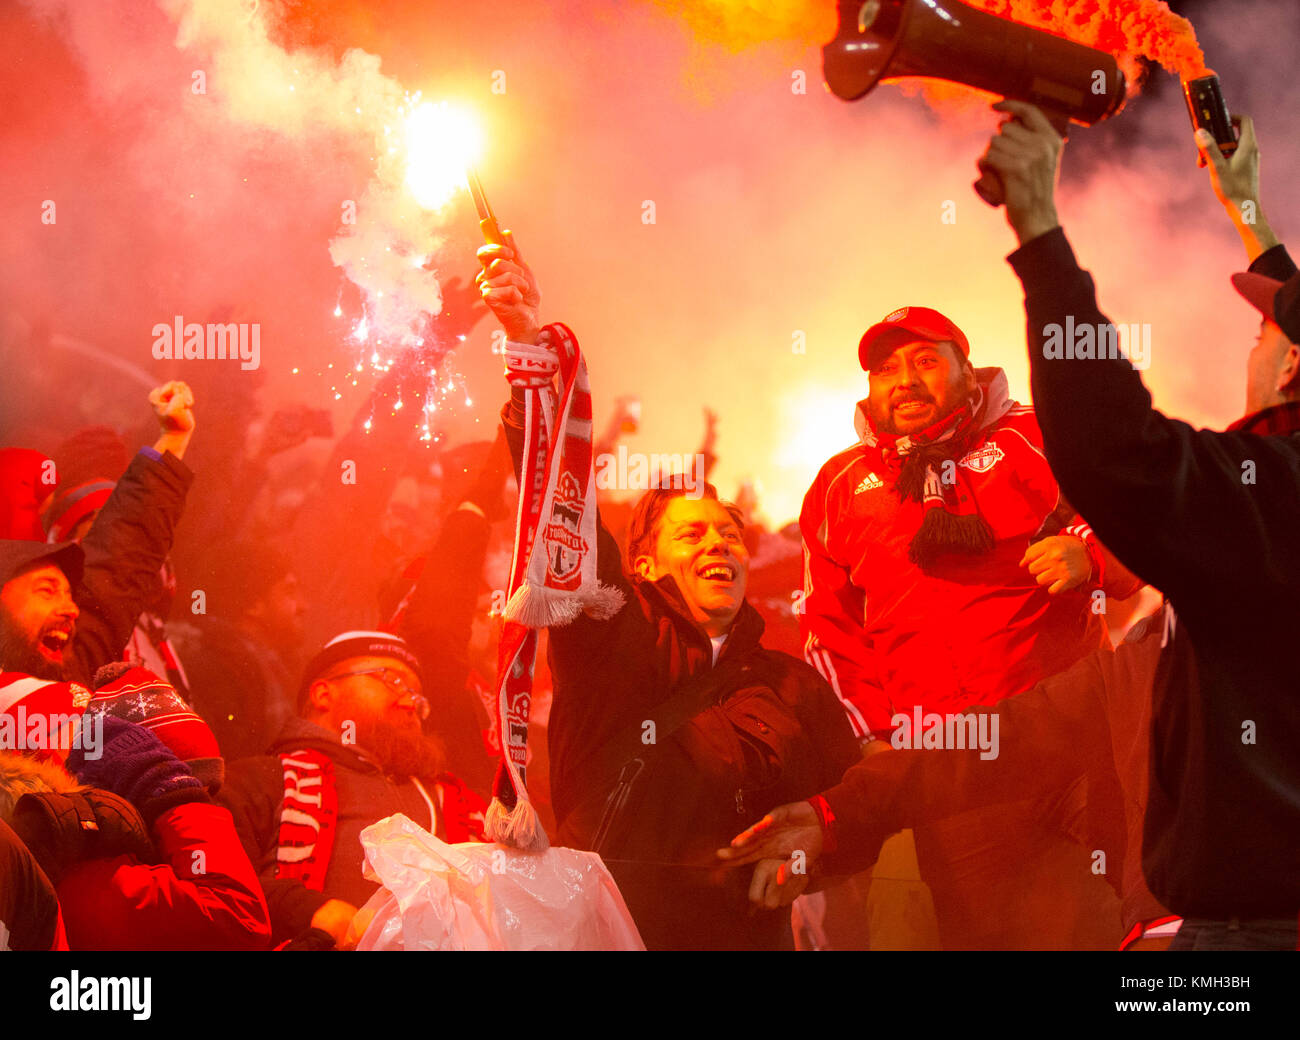 Toronto, Canada. 9th Dec, 2017. Fans of Toronto FC celebrate scoring during the 2017 Major League Soccer(MLS) Cup final between Toronto FC and Seattle Sounders FC at BMO Field in Toronto, Canada, Dec. 9, 2017. Toronto FC won 2-0 and claimed the title. Credit: Zou Zheng/Xinhua/Alamy Live News Stock Photo